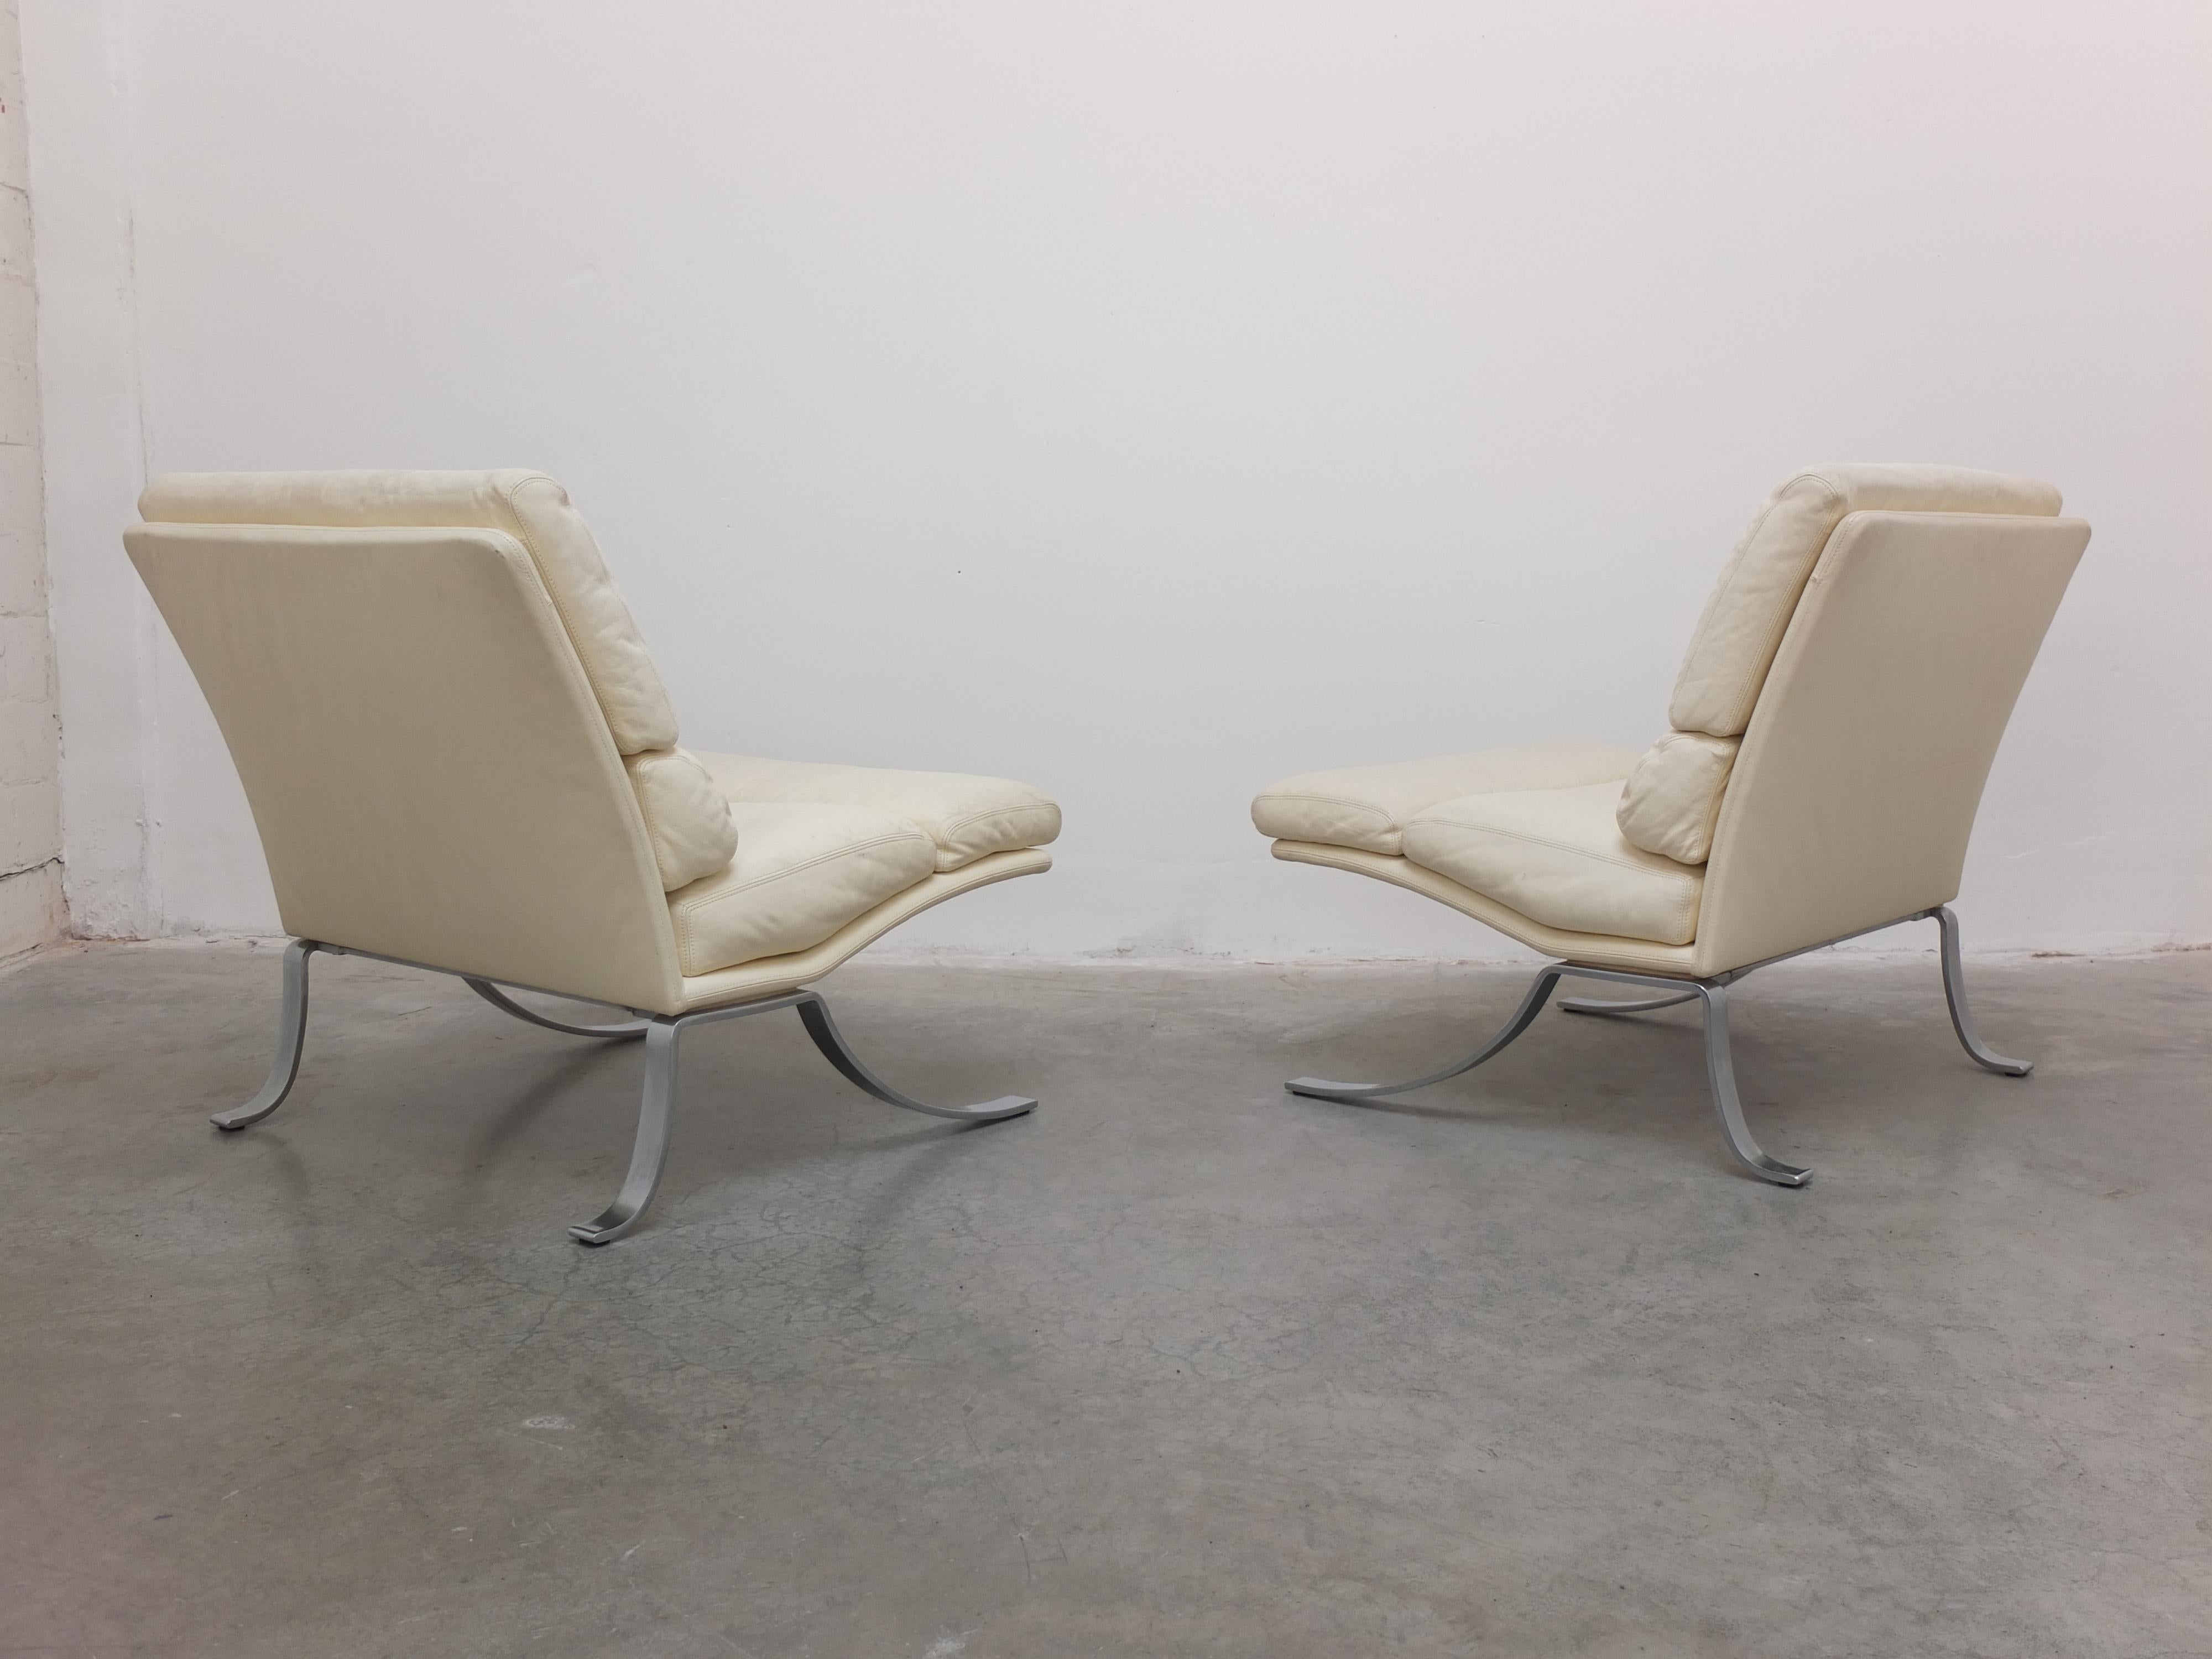 Metal Rare Pair of Belgian Modernist Lounge Chairs with Ottoman by Durlet, 1970s